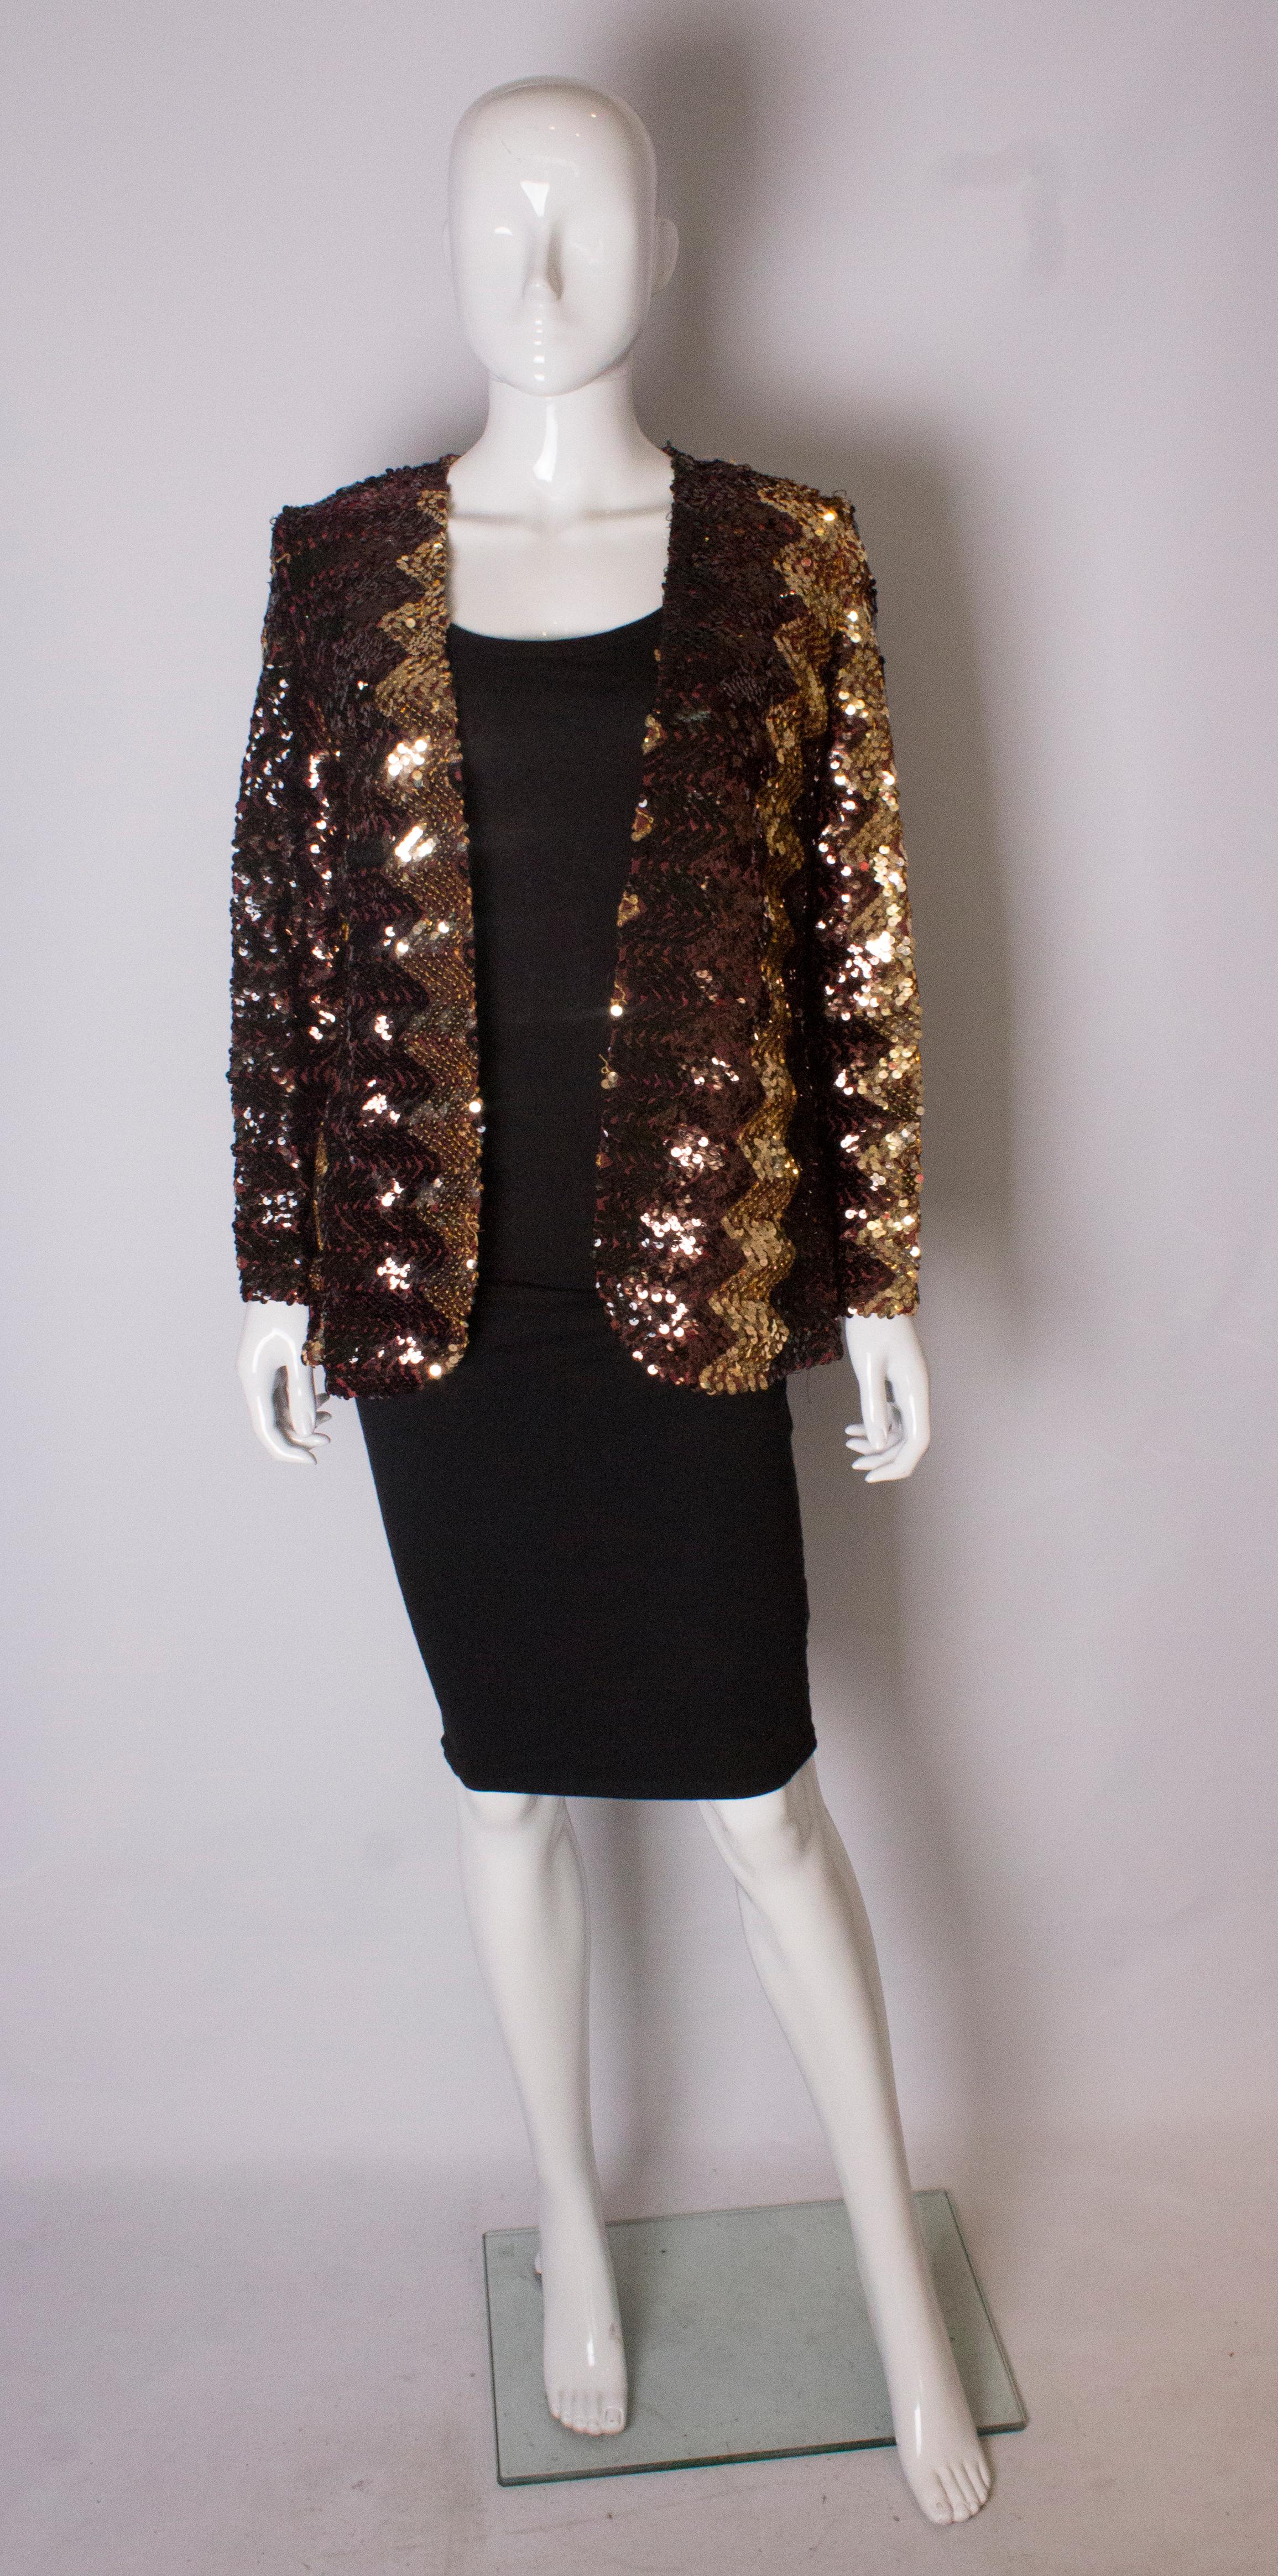 A chic sequin jacket by Sportaville UK.The jacket is decorated in copper, bronze and brown sequins in an unusual vertical design. The jacket has a v neckline.